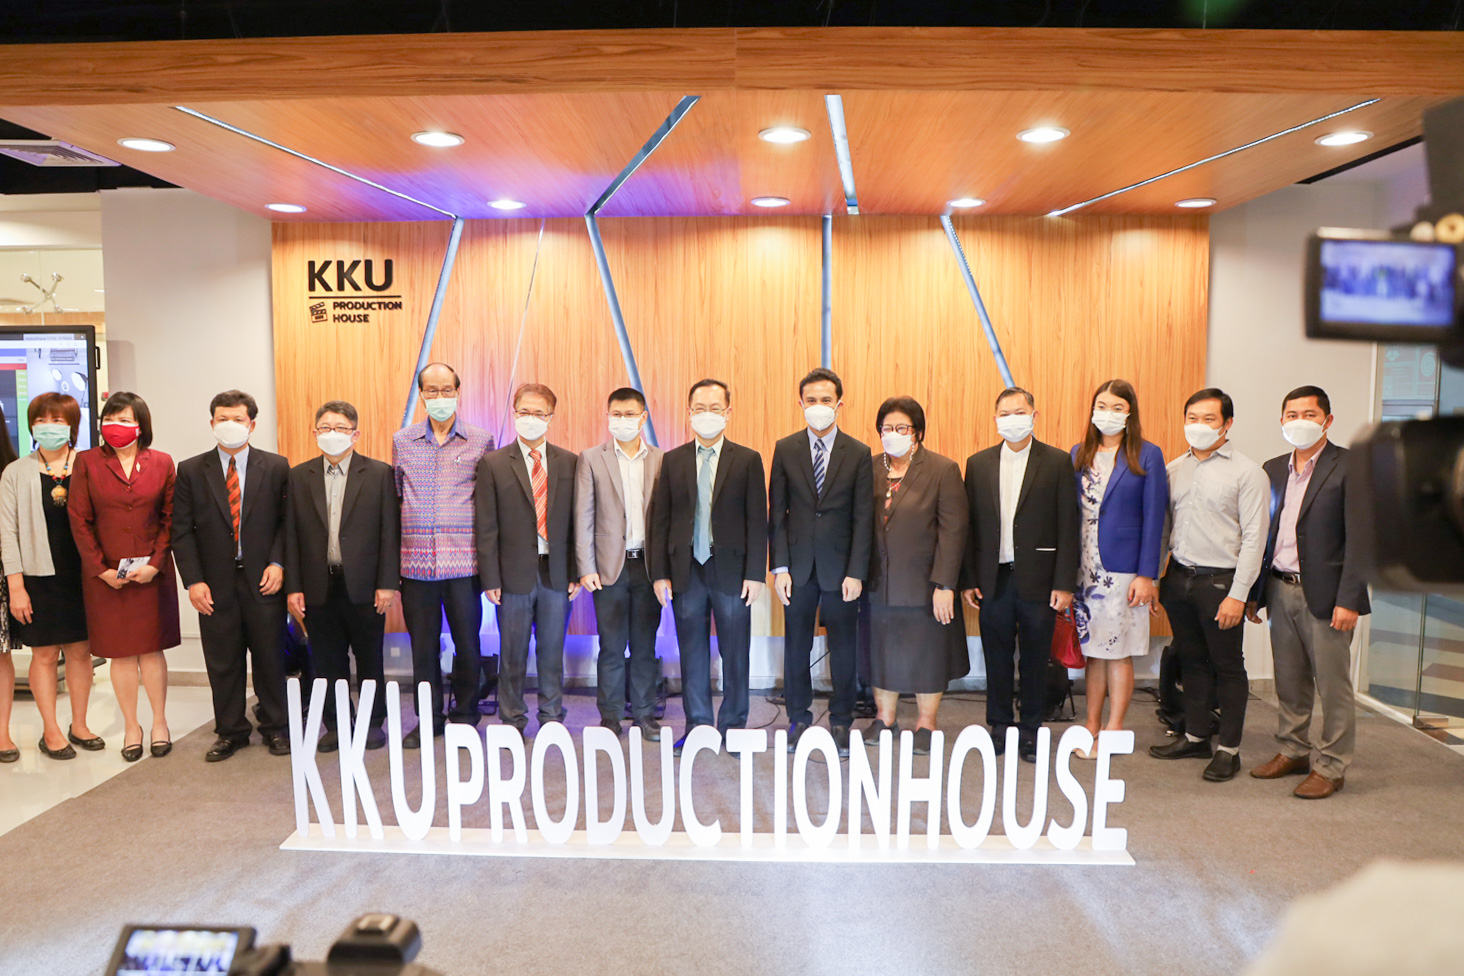 Another advanced step: “KKU Production House” for the digital era ...